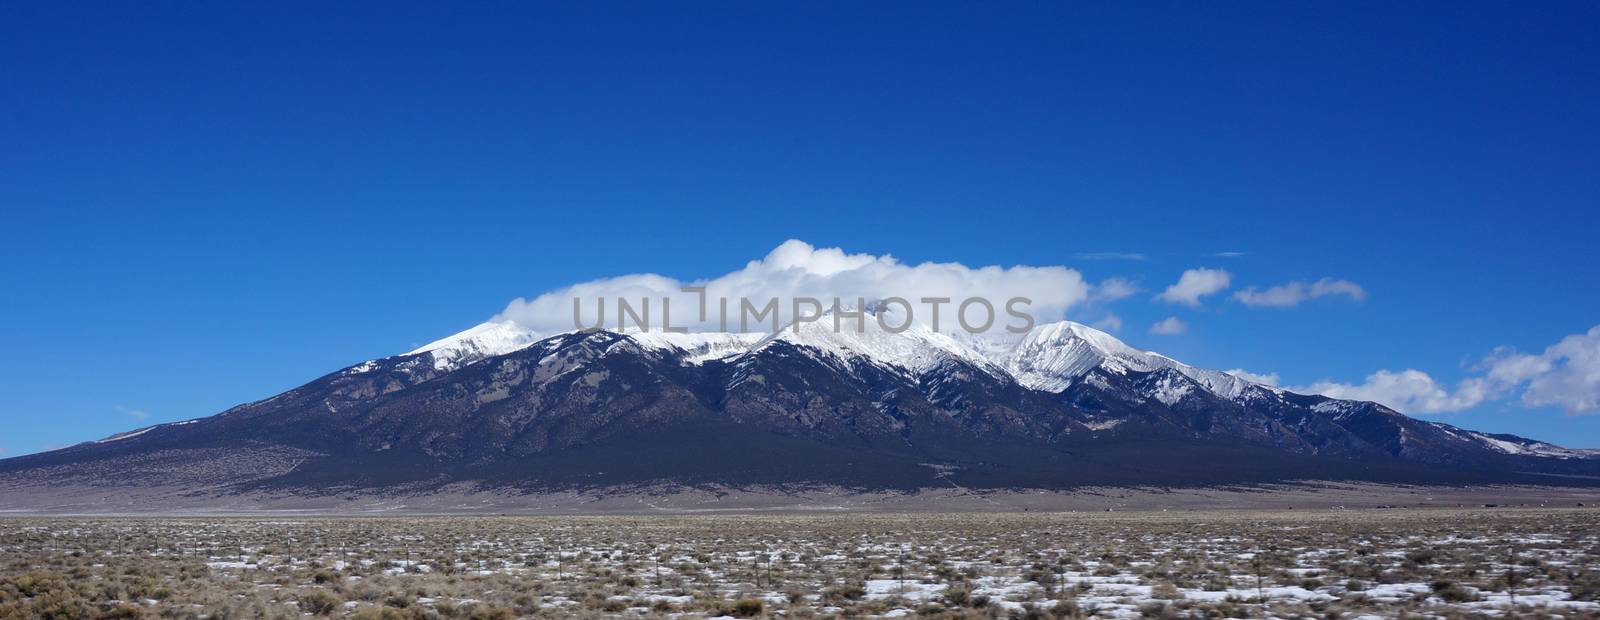 Mountains in Colorado in winter by tang90246